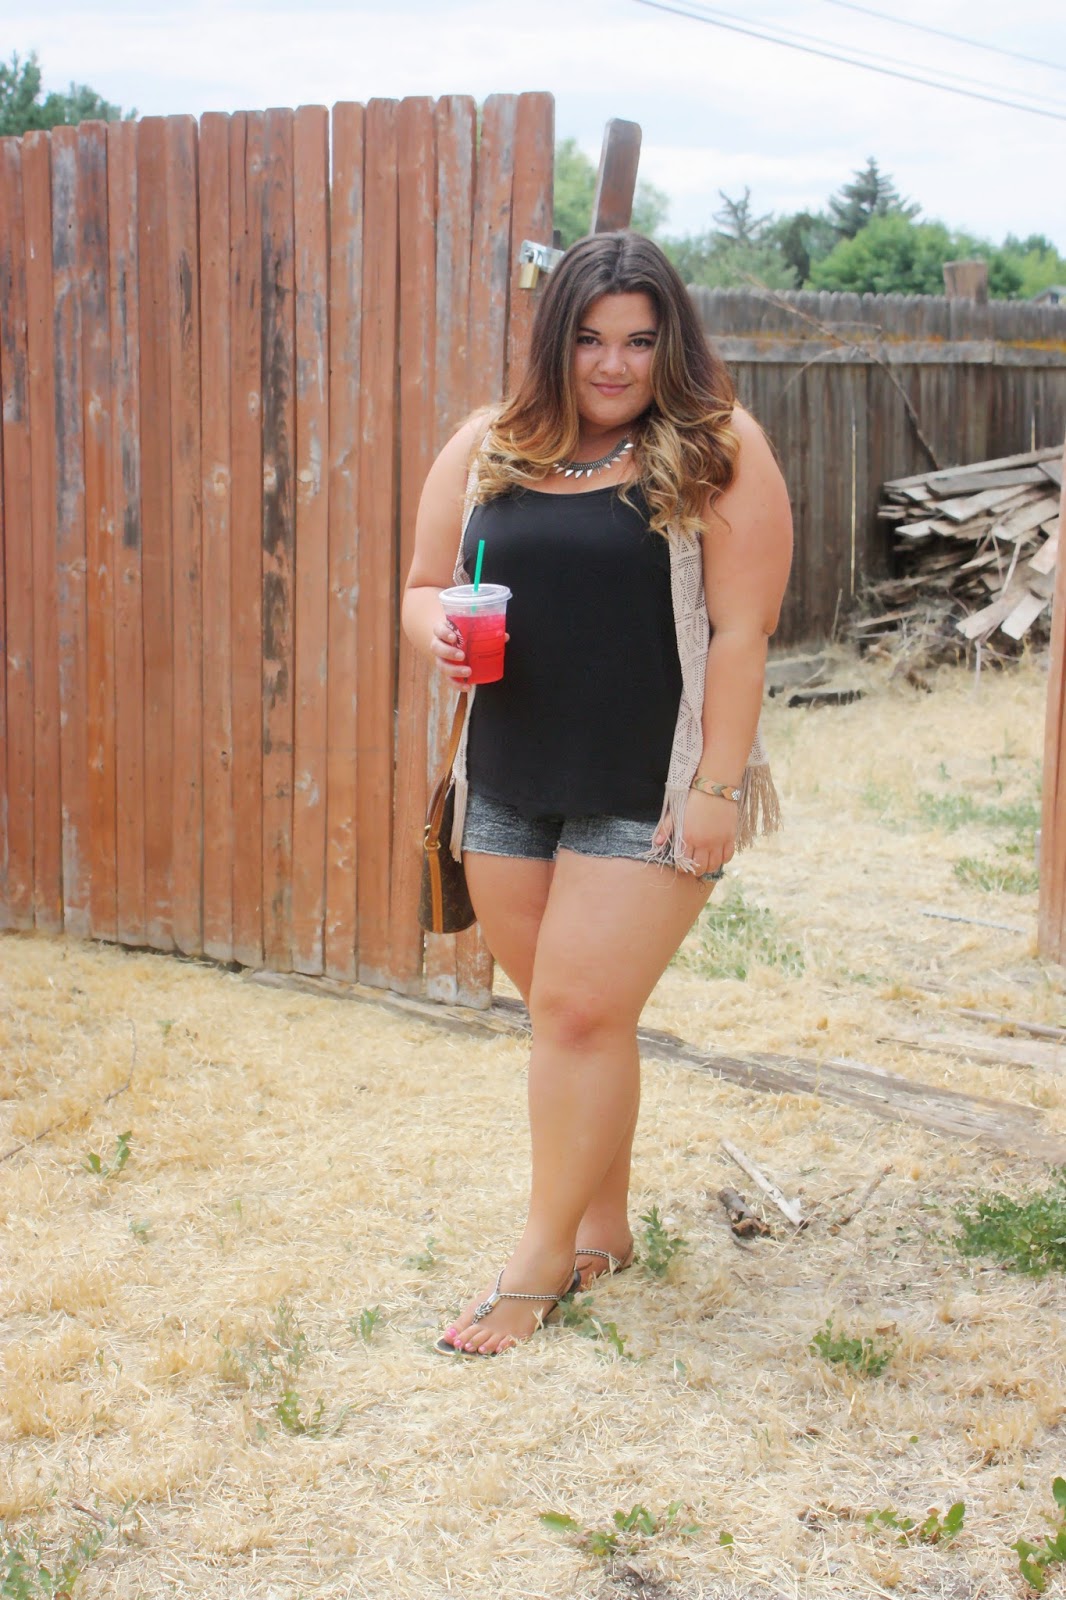 fringe, natalie craig, natalie in the city, country style, abandoned house, spikes, BKE, Buckle, Daytrip, Forever 21 plus size, plus size fashion blogger, style, OOTD, nose ring, shorts, fringe, tribal, bling, starbucks, passion tea, Louis Vuitton, mix and match jewelry, ombre, curly hair